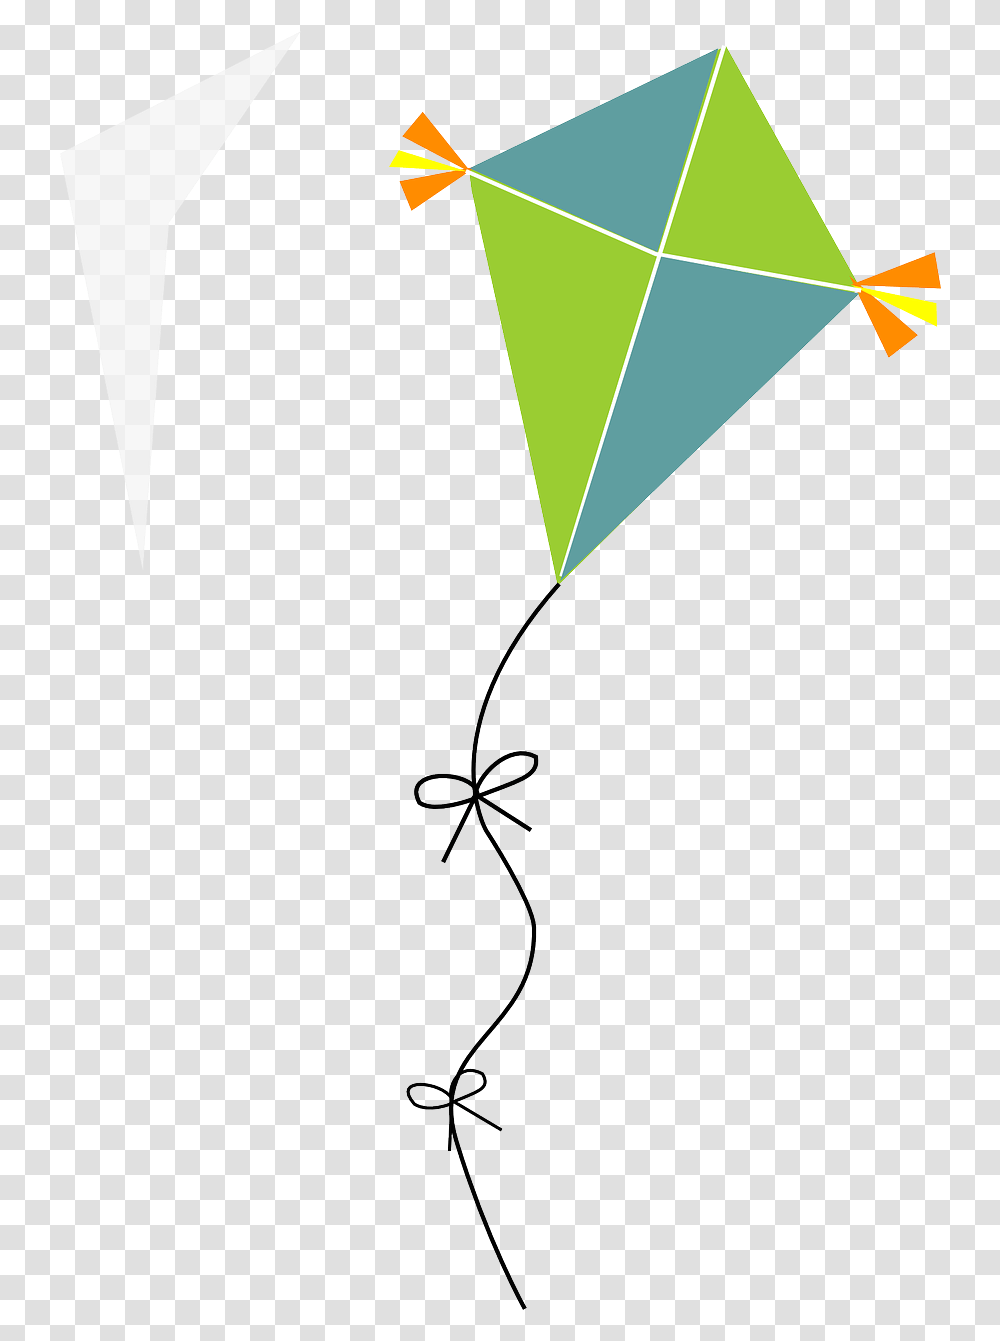 Green Blue Orange Free Vector Graphic On Pixabay Kite Clipart, Toy Transparent Png